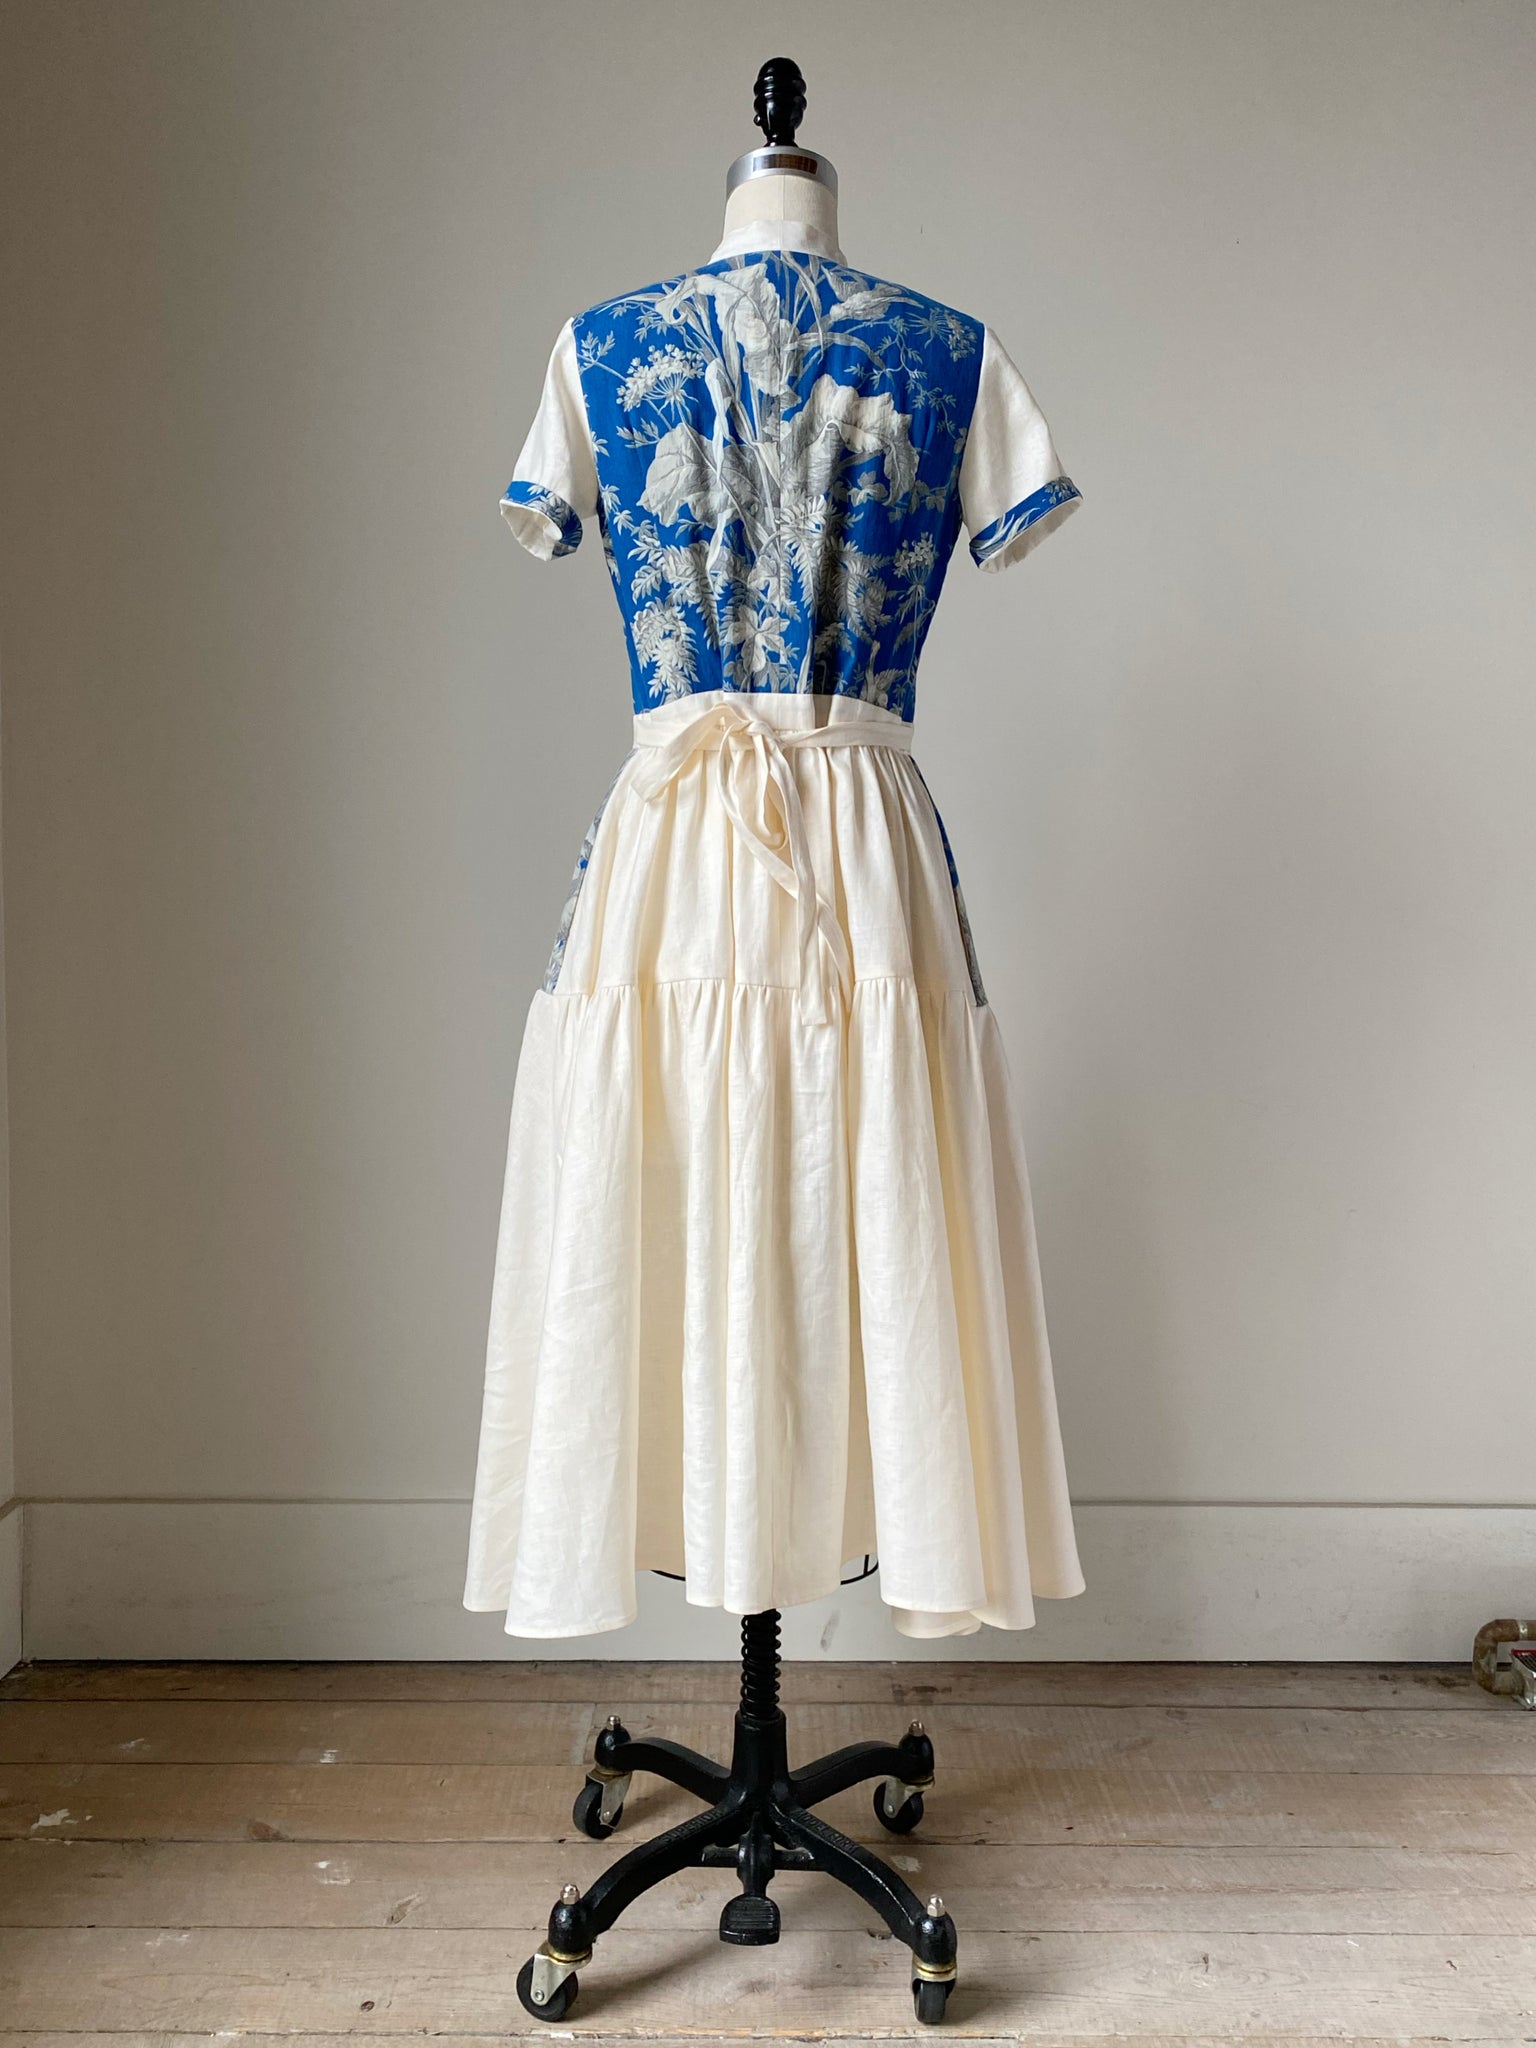 19th century blue toile patched tiered dress xs,s,m,l